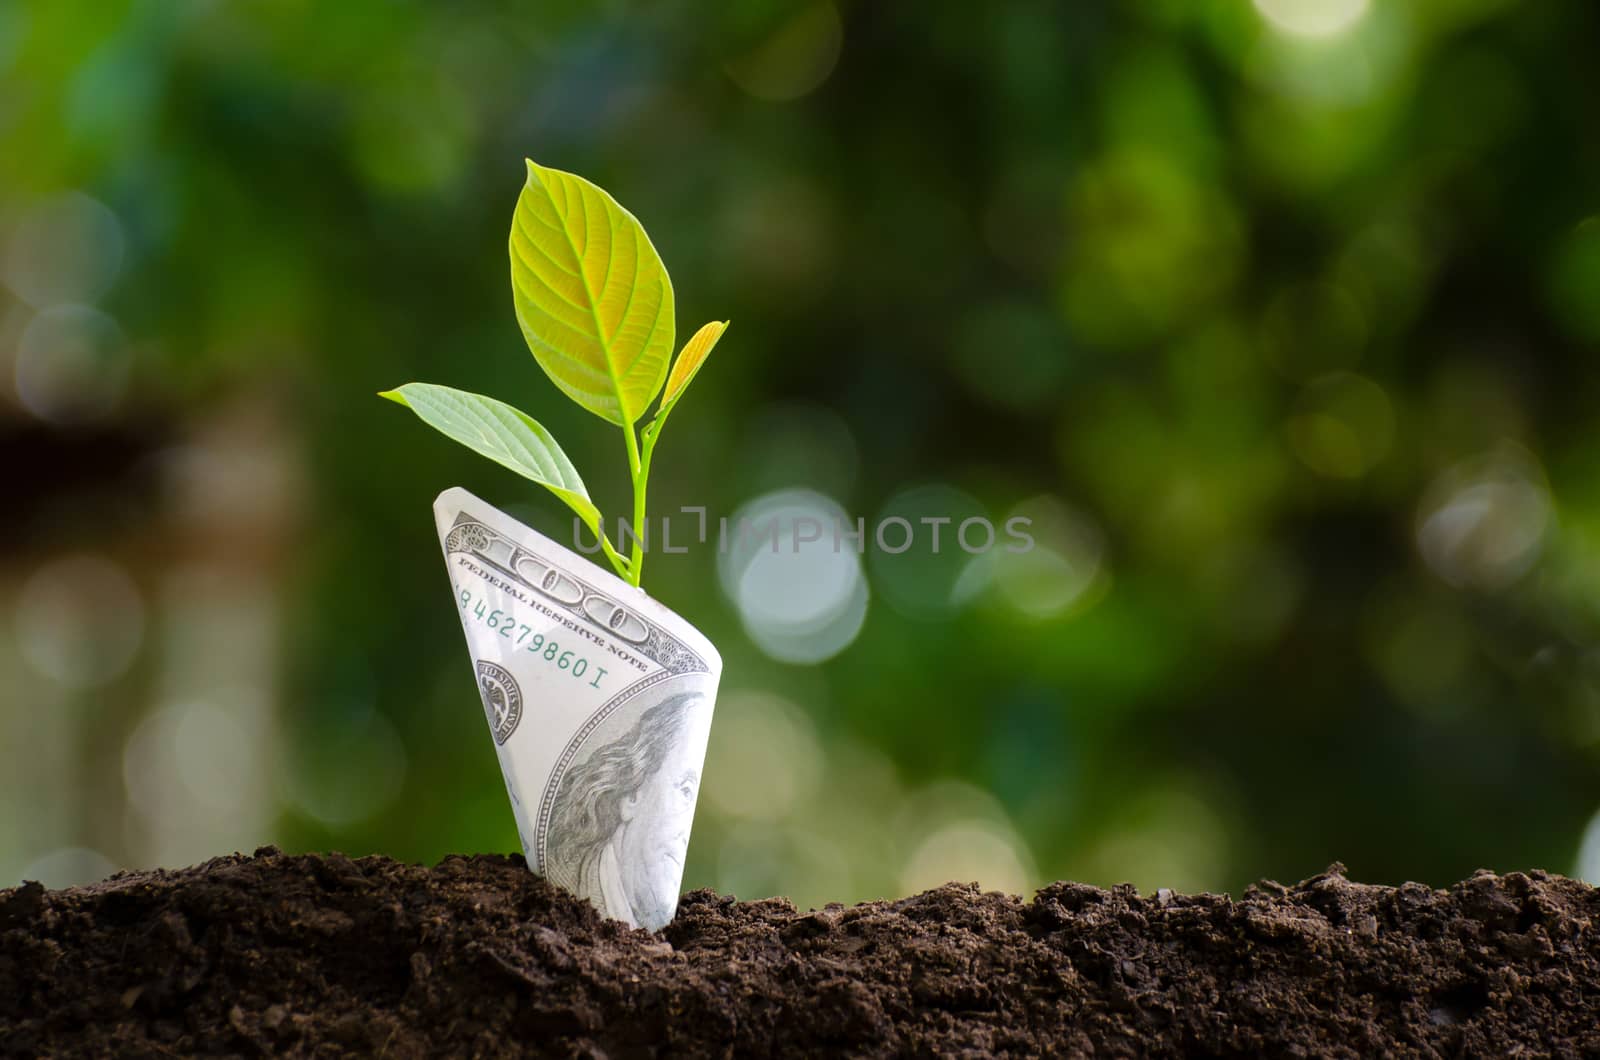 Banknotes tree Image of bank note with plant growing on top for business green natural background money saving and investment financial concept